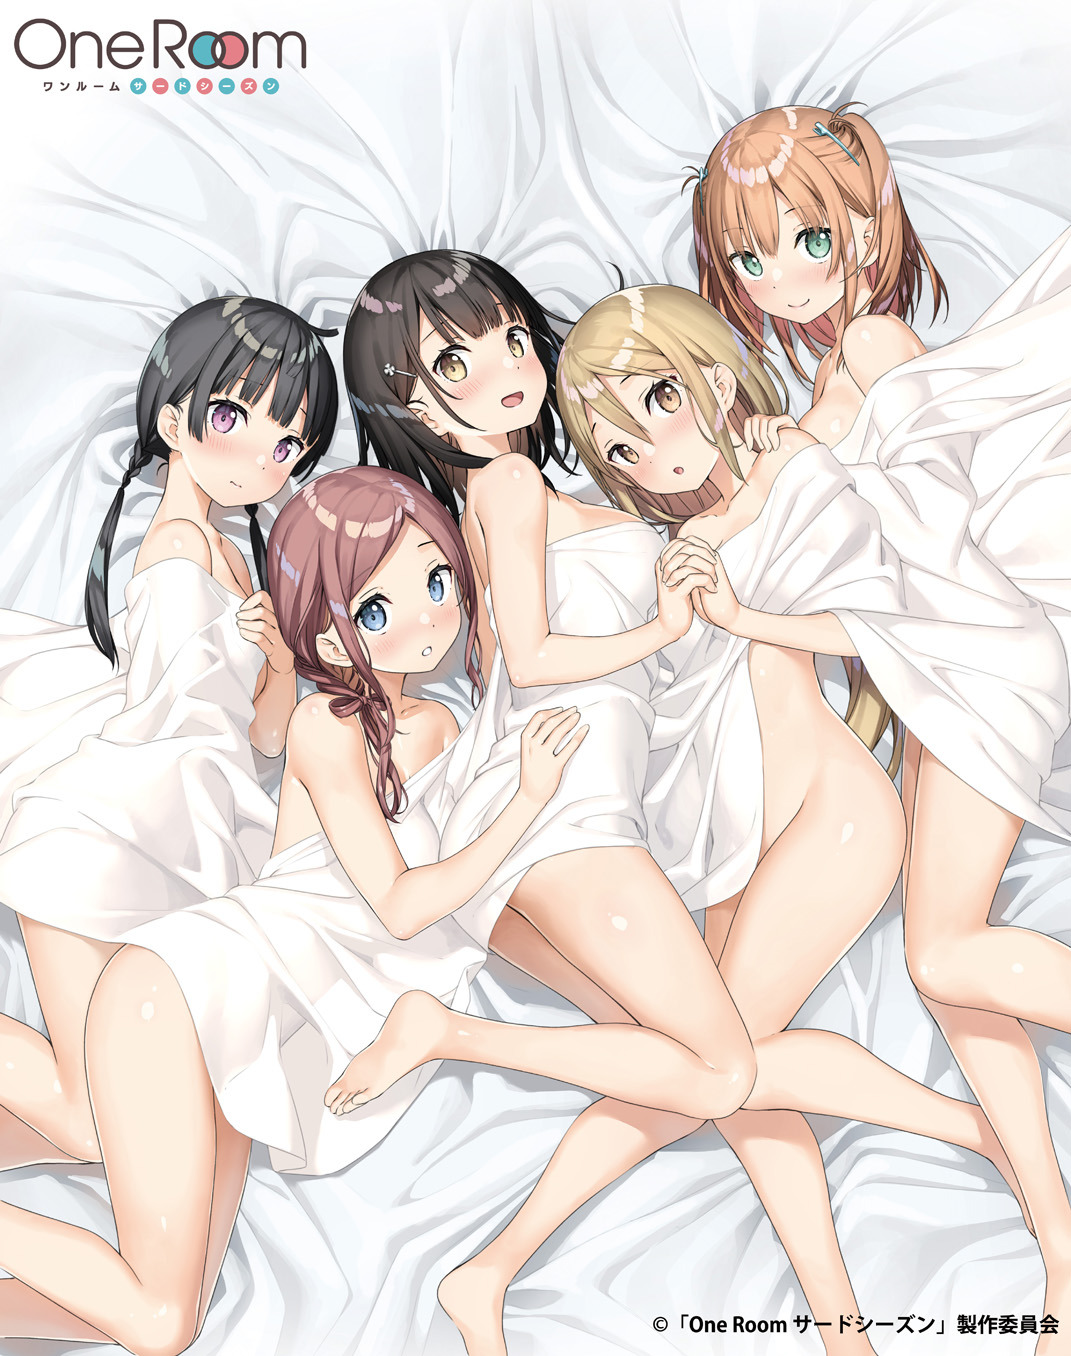 All Things Anime — One Room 3rd Season - Blu-ray Illustration by...